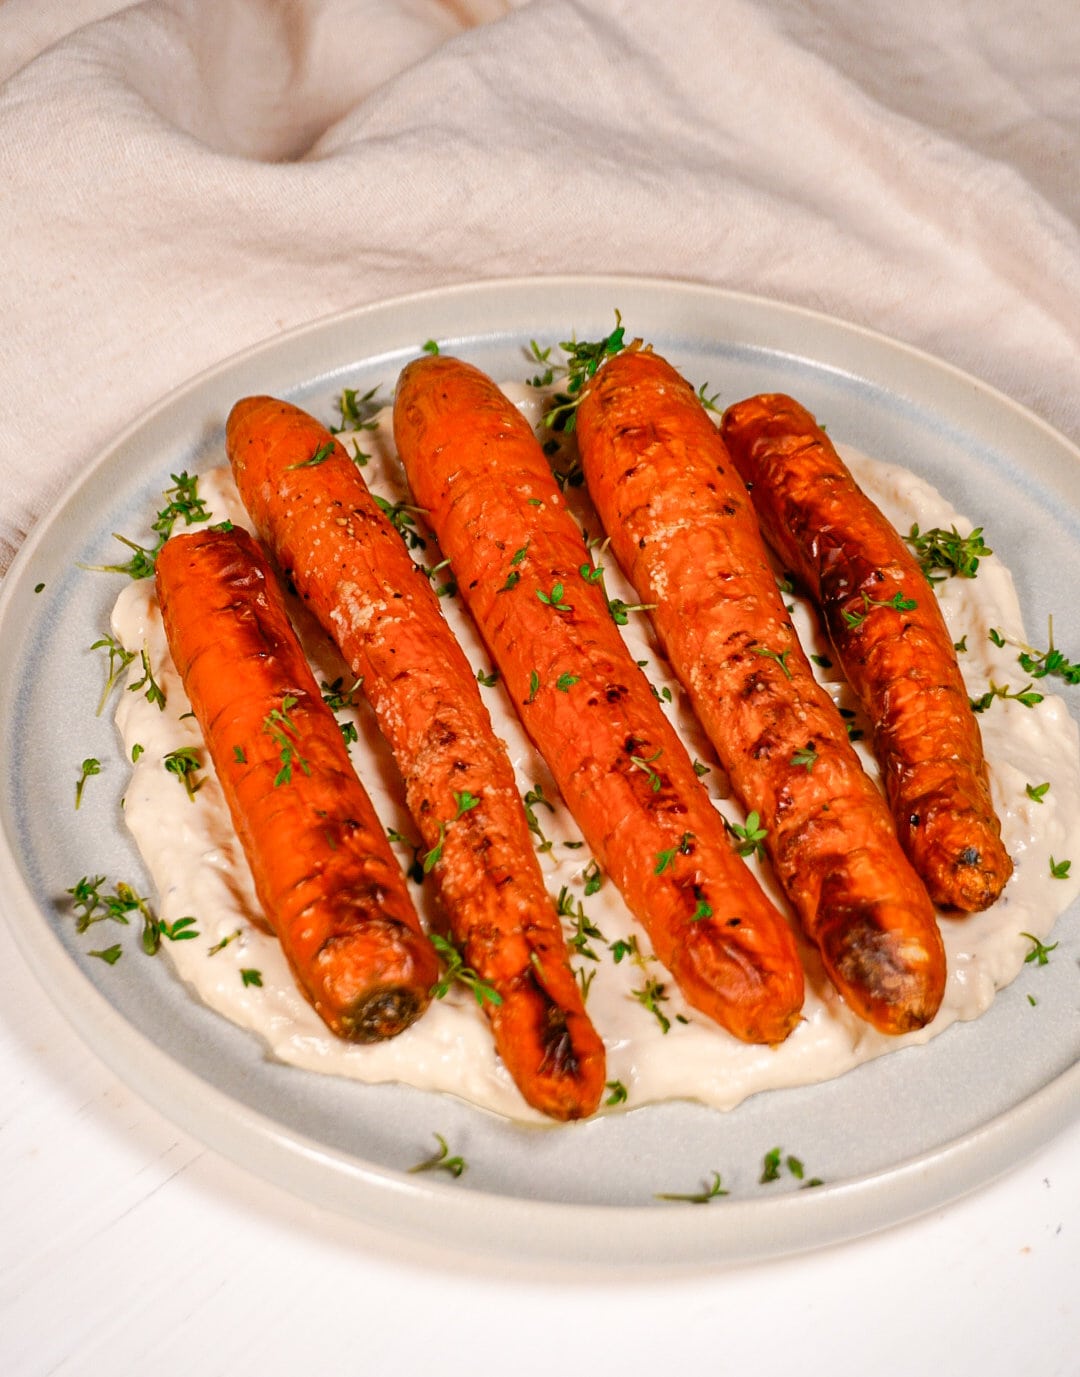 Roasted Carrots with Tofu Spread